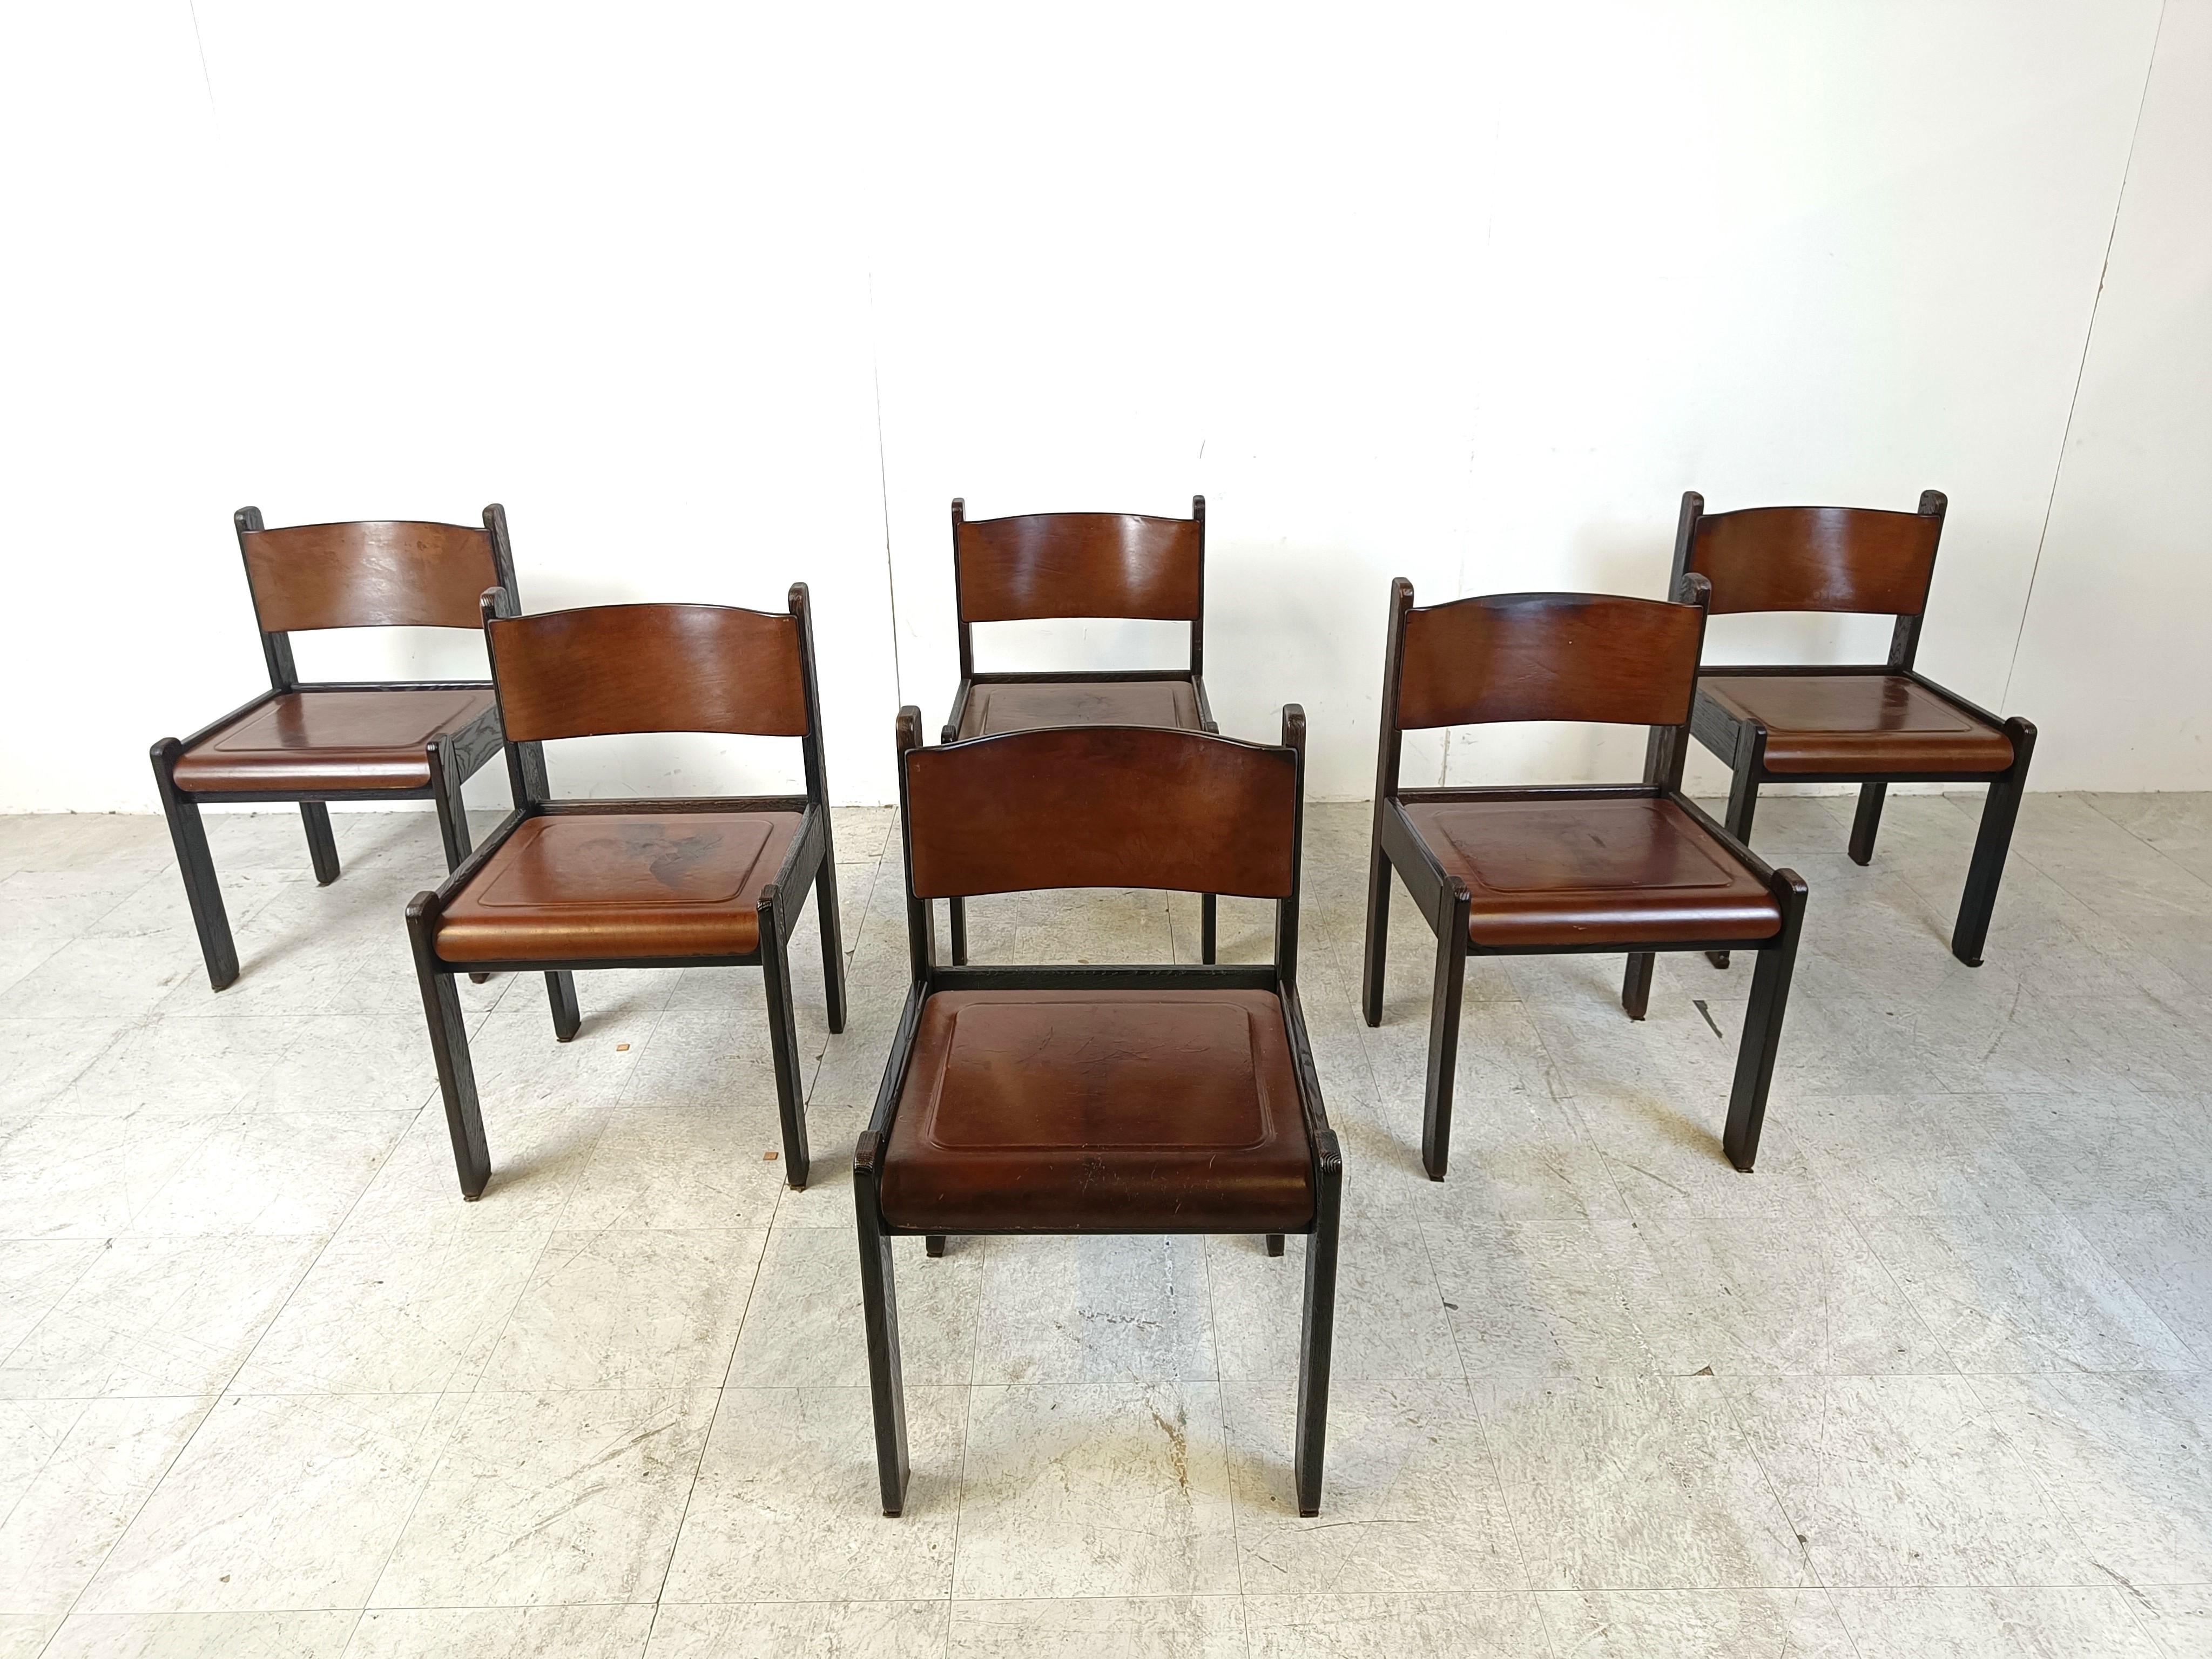 Vintage dining chairs with a black wooden frame and with a thin leather of nicely patinated leather on the seats and backrests.

Unique chairs with a beautiful vintage look.

Good condition with some nice patina, sturdy frames.

1960s -